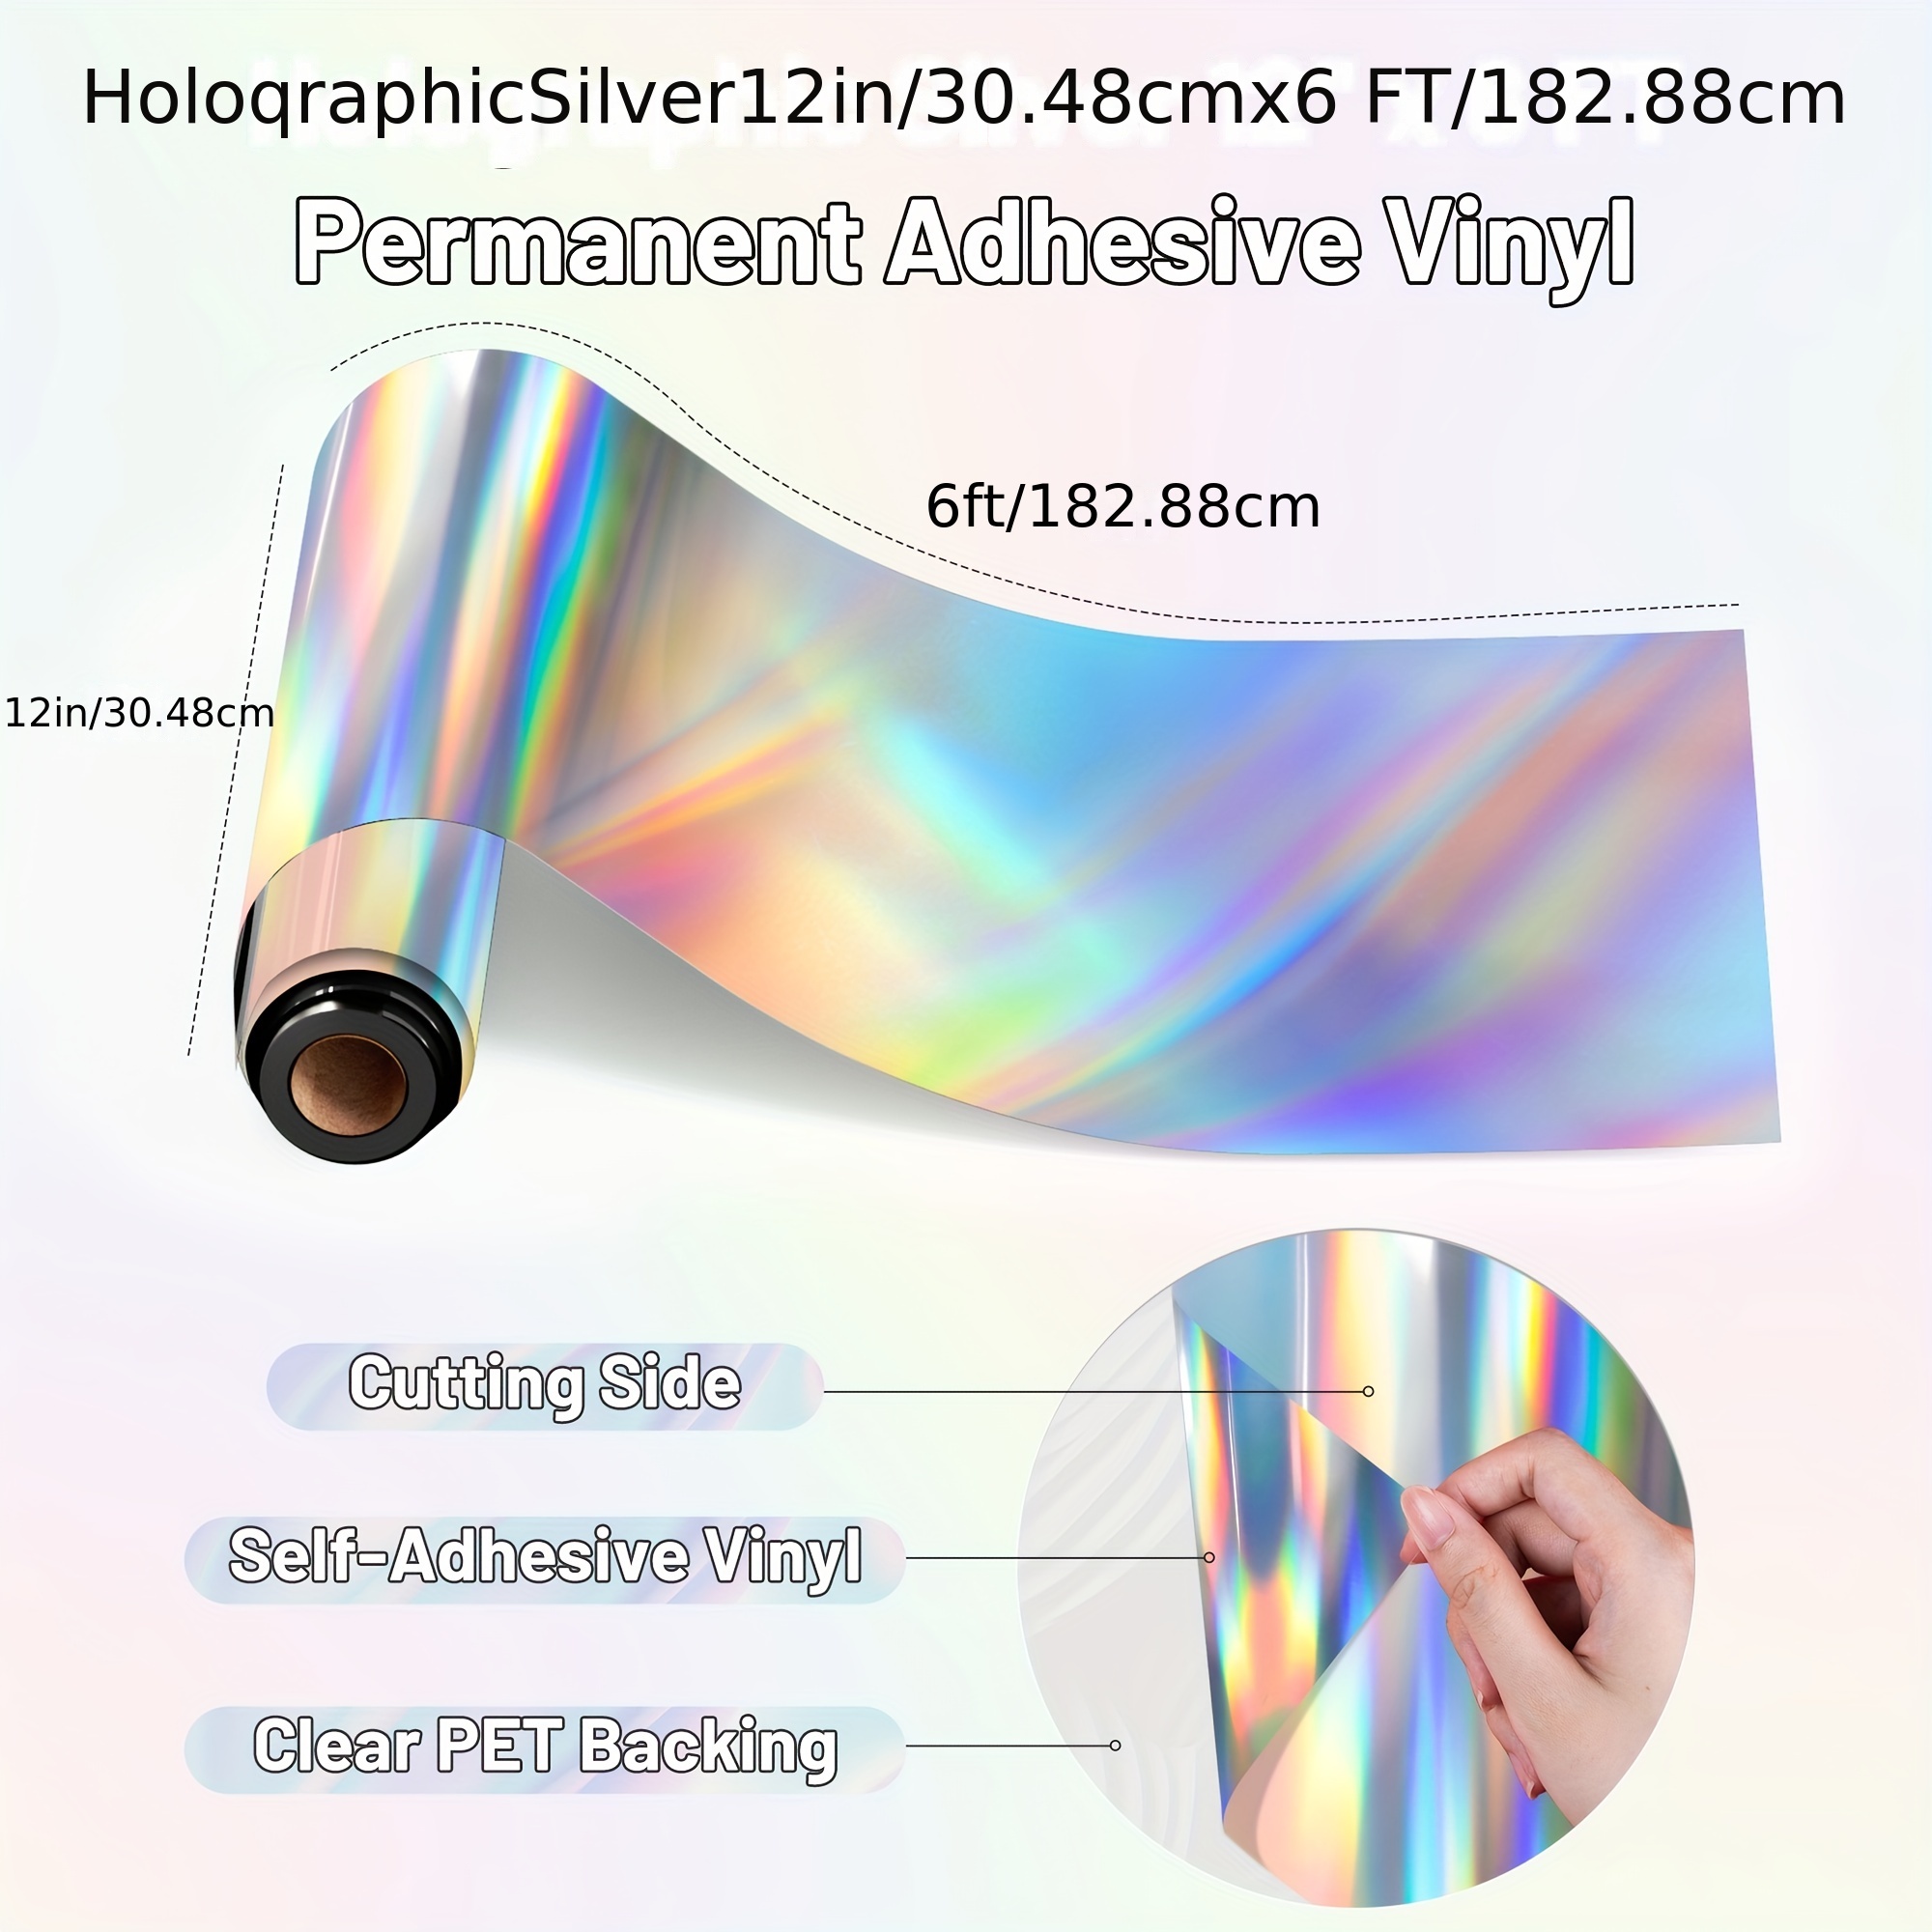 Holographic Vinyl Rainbow Glossy Silver Permanent Vinyl Adhesive Vinyl Roll  12inches X 6 Feet,Craft Vinyl Silver for Vinyl Cutter for DIY Cup